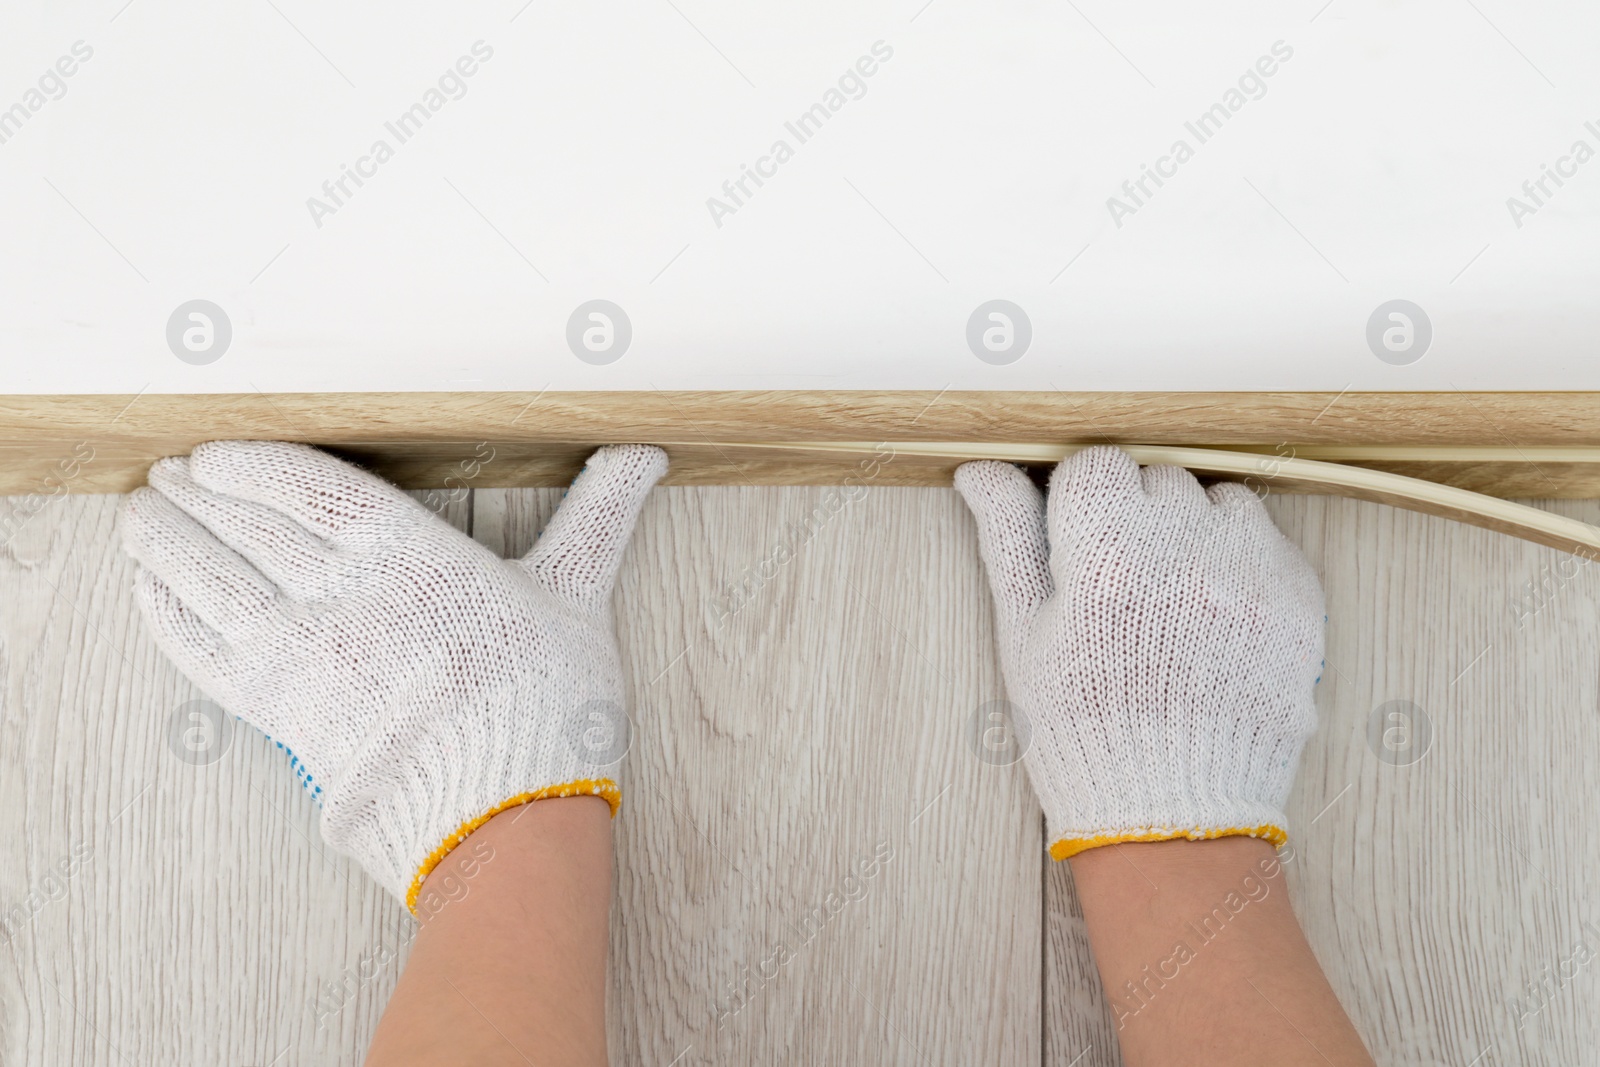 Photo of Man installing plinth on laminated floor in room, top view